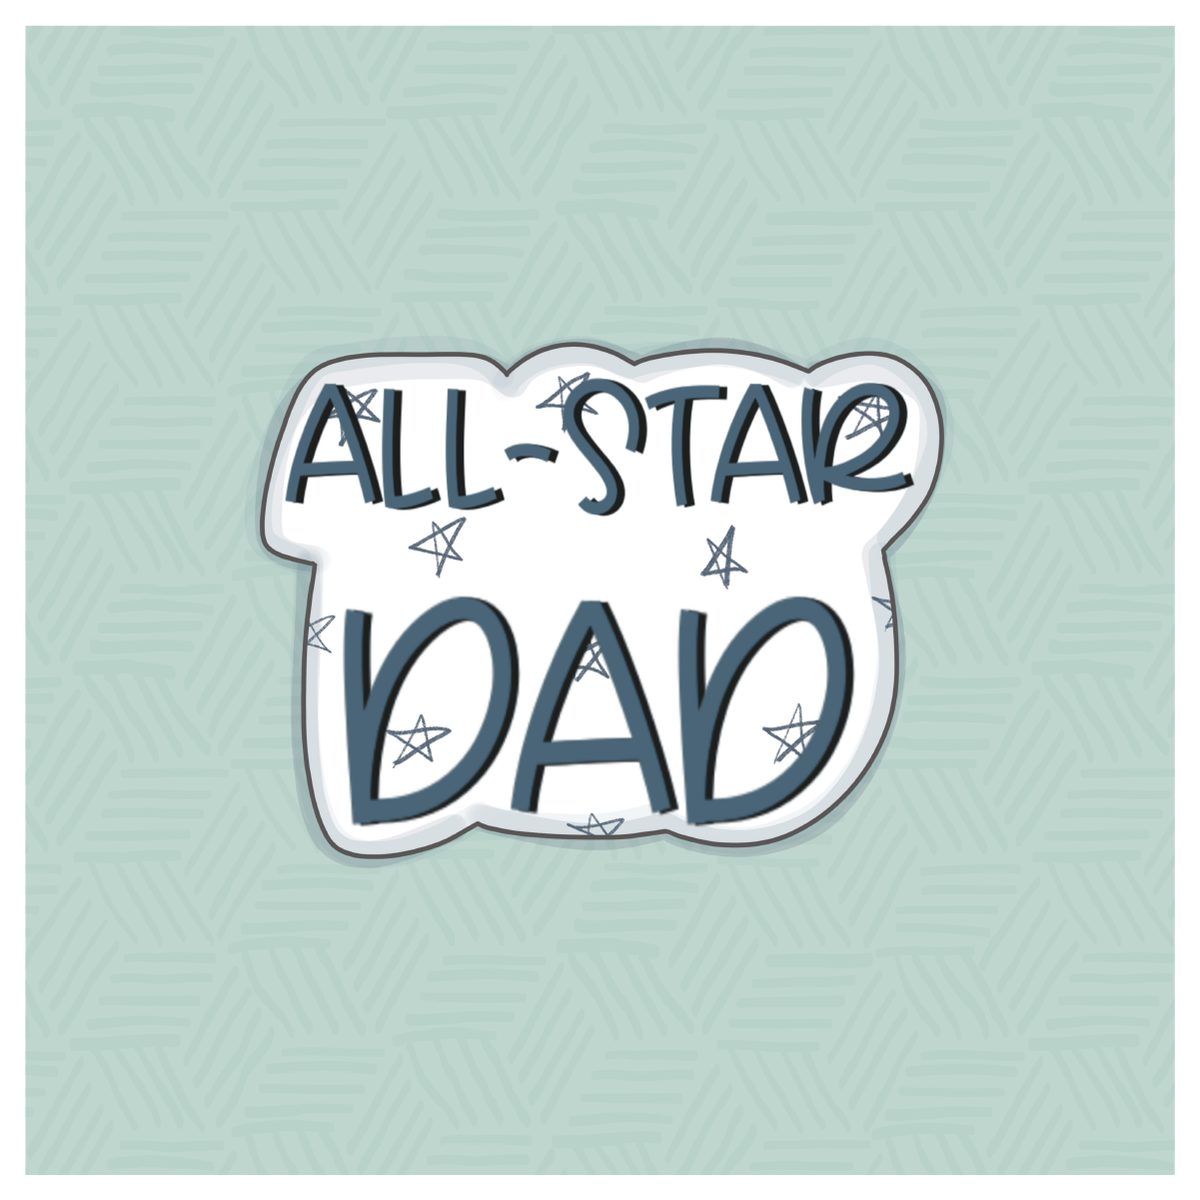 All Star Dad Hand Lettered Cookie Cutter